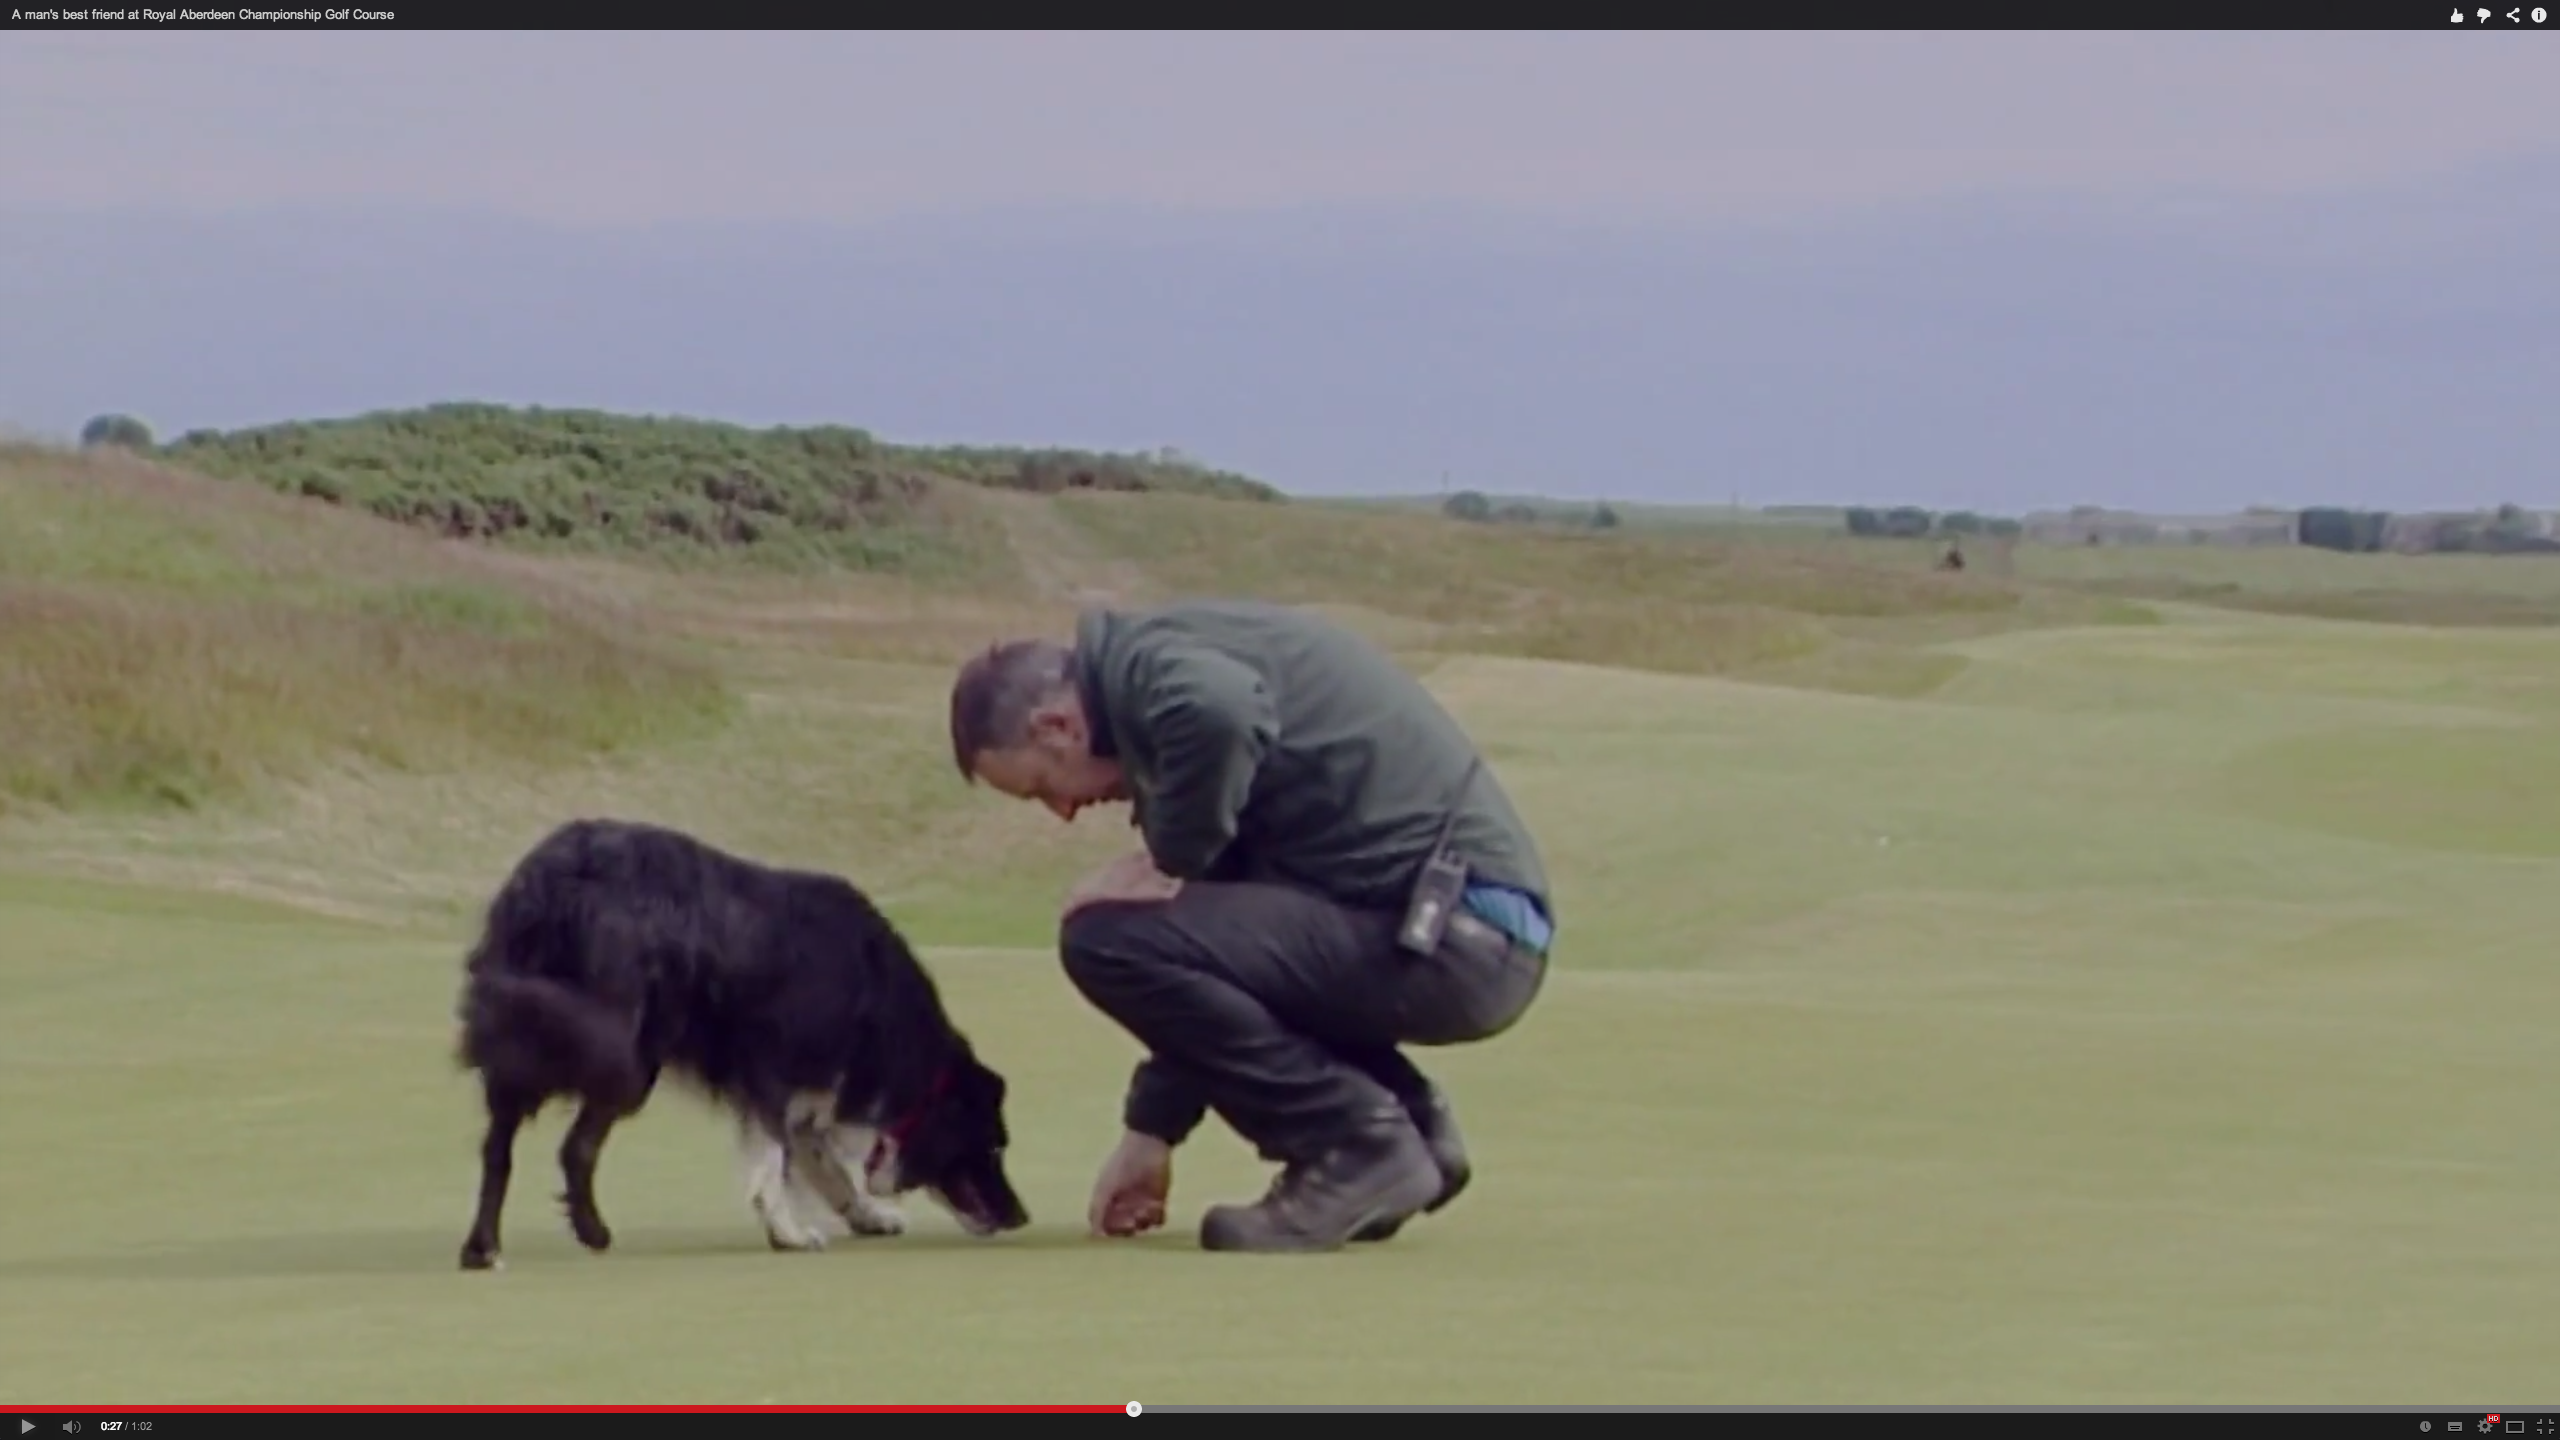 Royal Aberdeen Golf Club's head greenkeeper, Robert Paterson with his dog Skye on the course